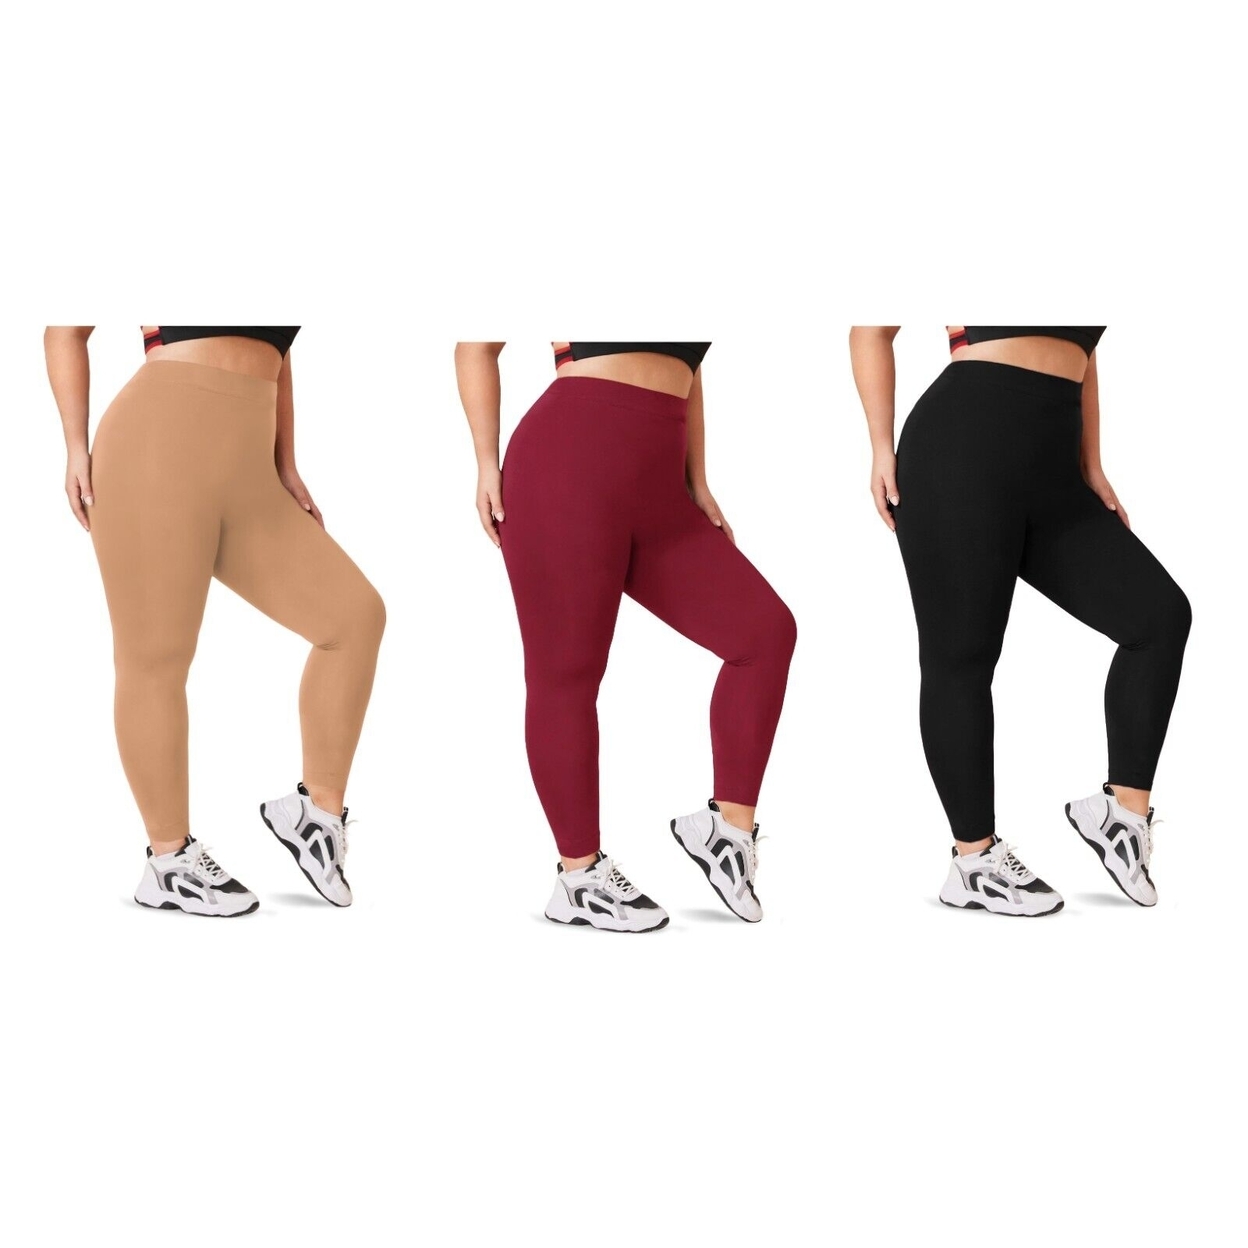 2-Pack: Women's Casual Ultra-Soft Smooth High Waisted Athletic Active Yoga Leggings Plus Size Available - Black & Black, 4x